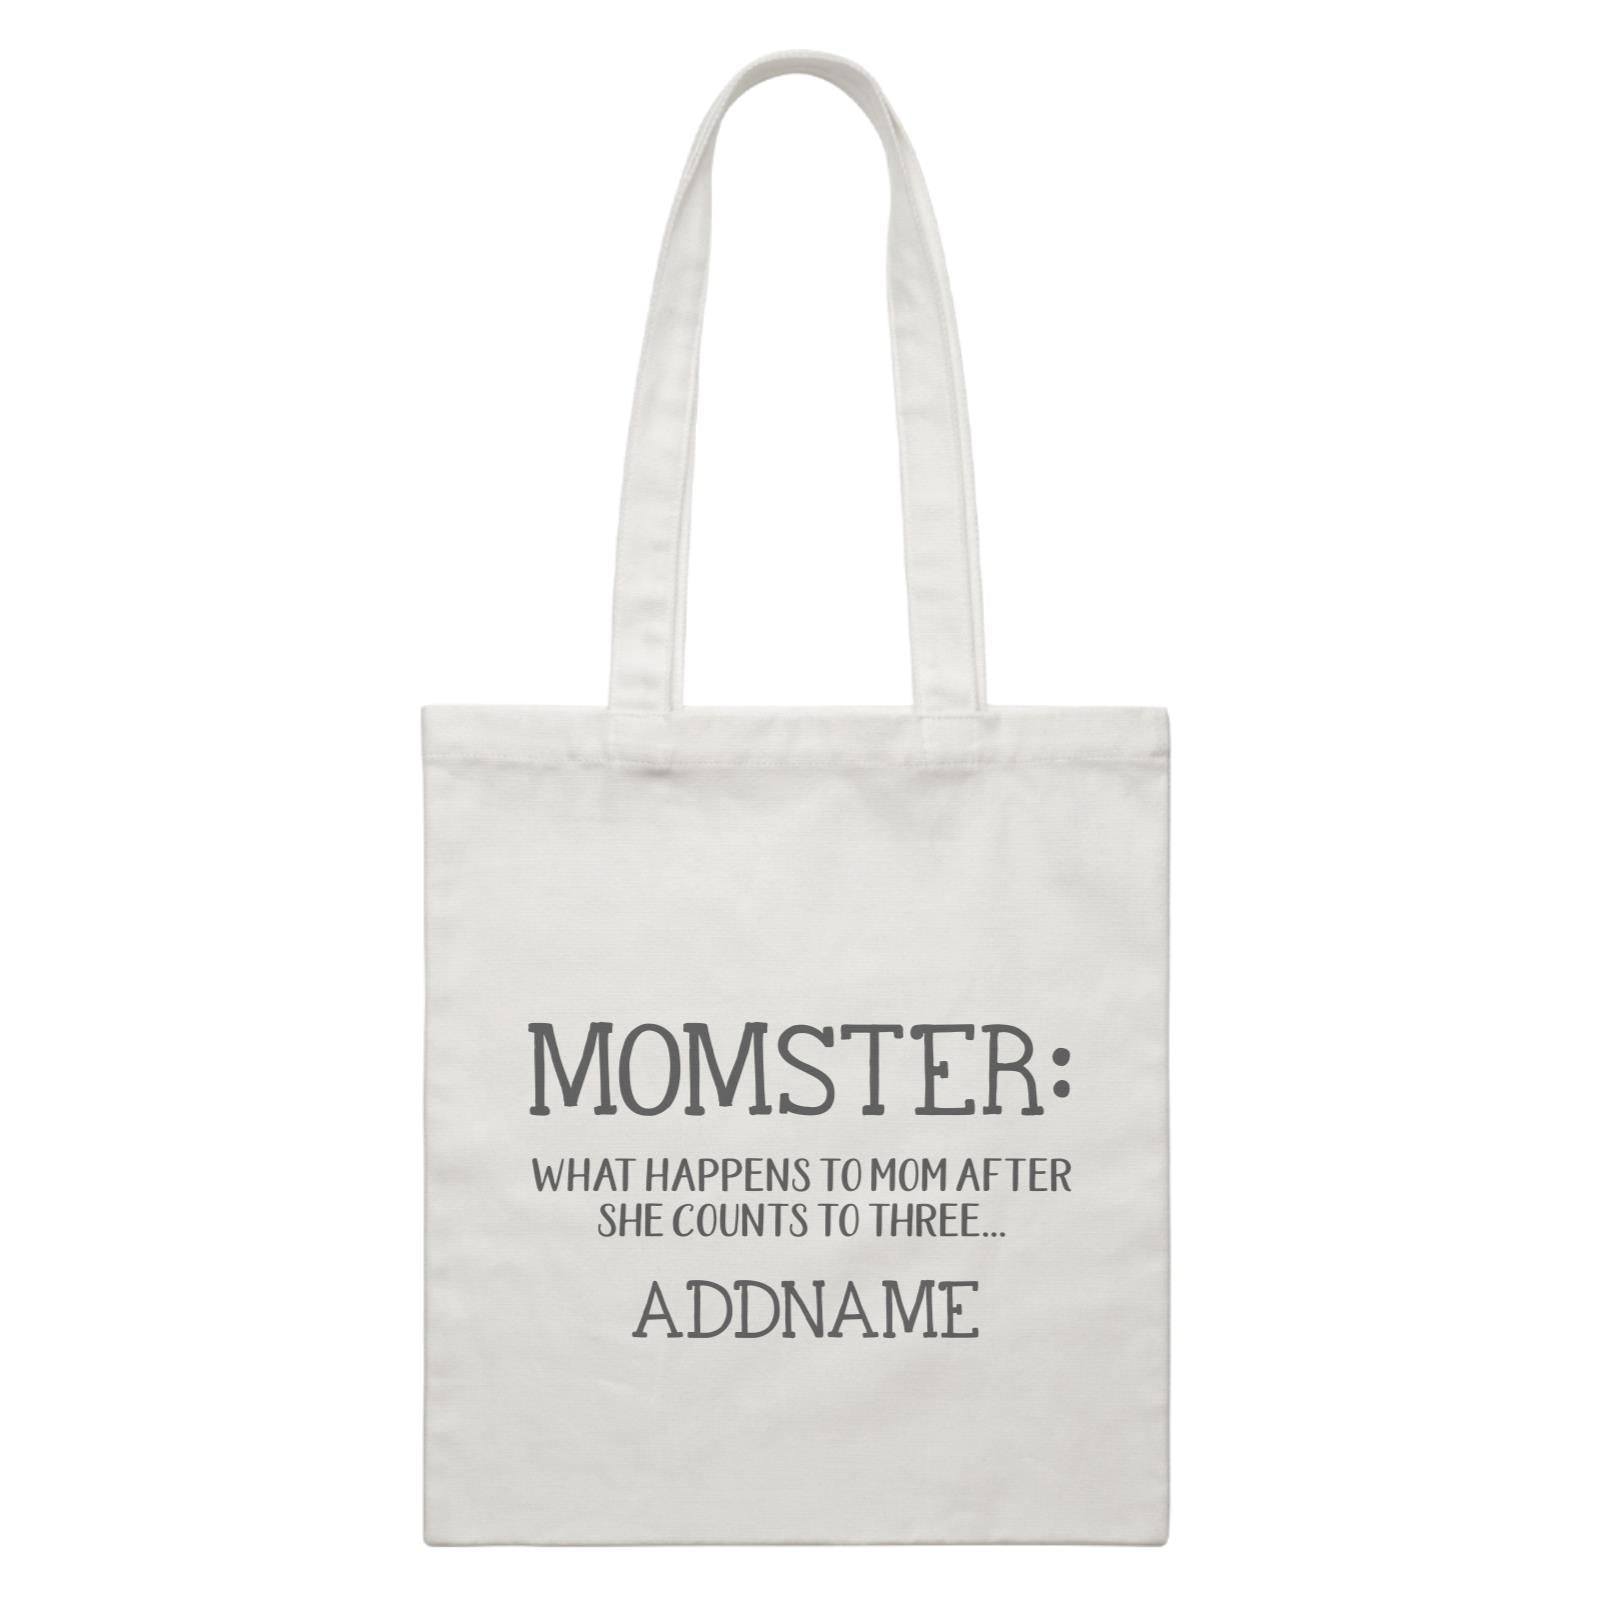 Funny Mom Quotes Momster What Happens To Mom After She Counts to Three Addname Accessories White Canvas Bag